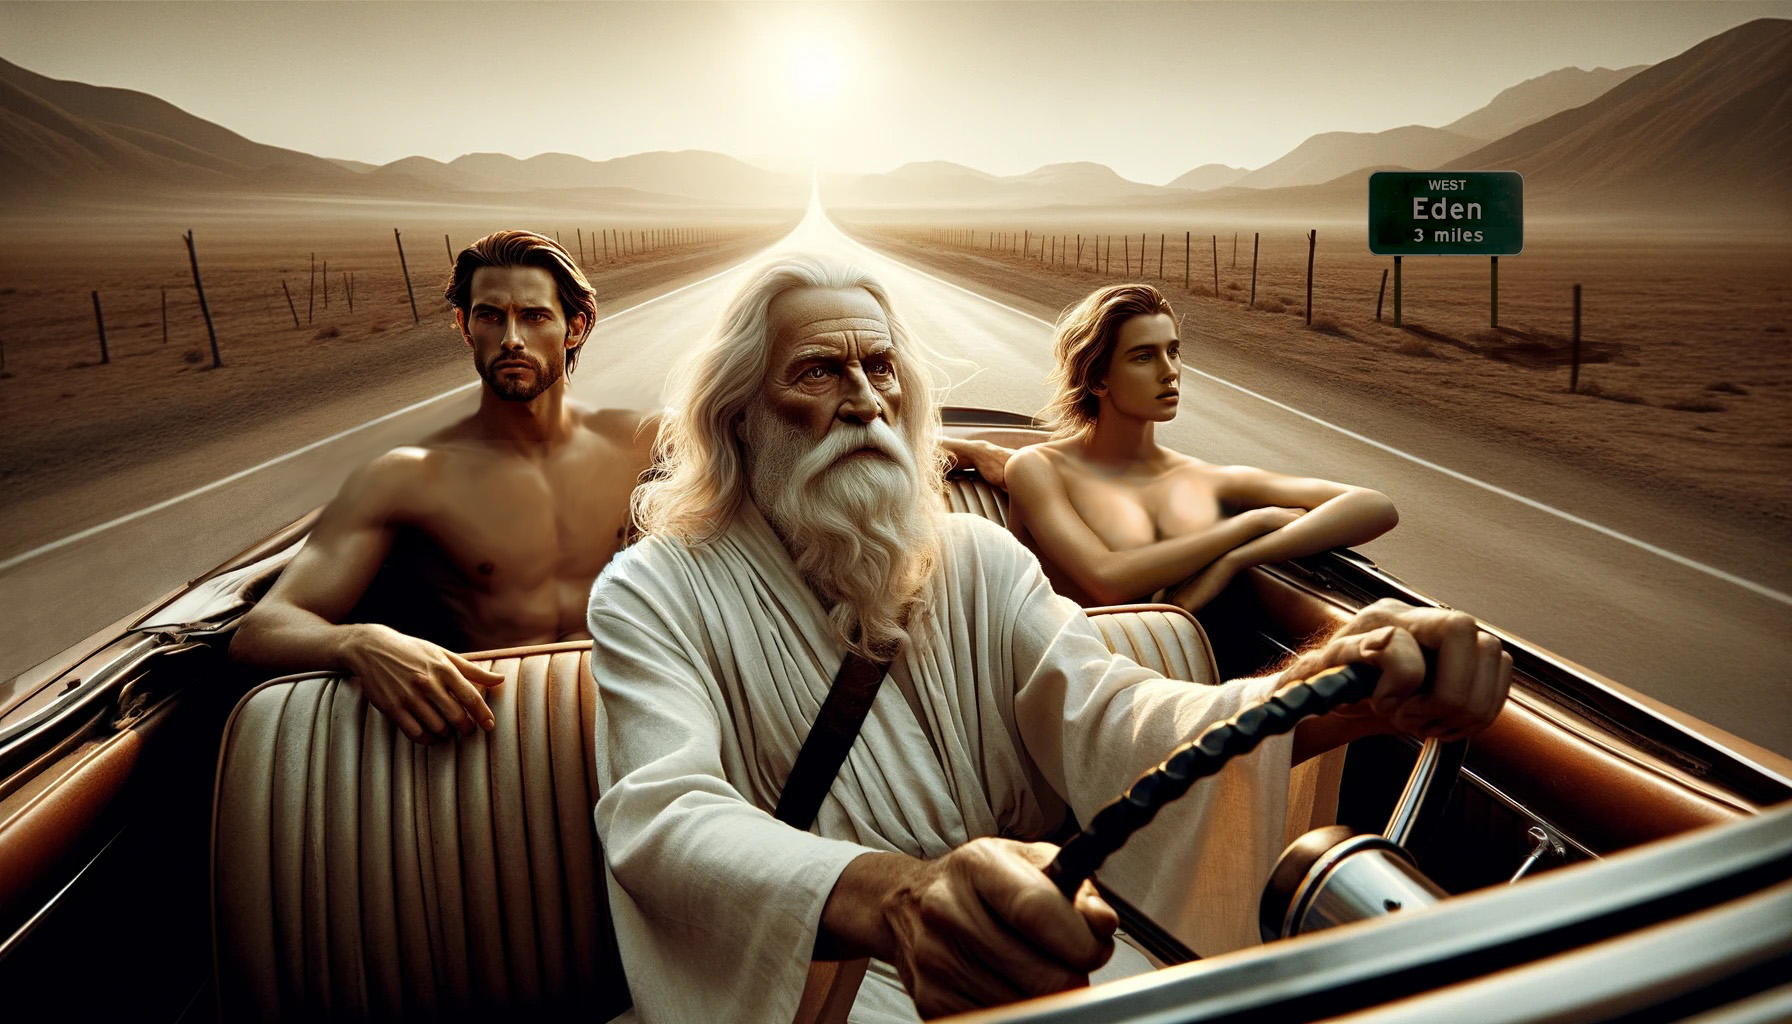 An old man (God) with white hair and a beard driving a convertible car with two young passengers (Adam & Eve), heading towards a destination called Eden. "And he (Harold be thy name) drove them out of Eden in his Fury (Plymouth)."